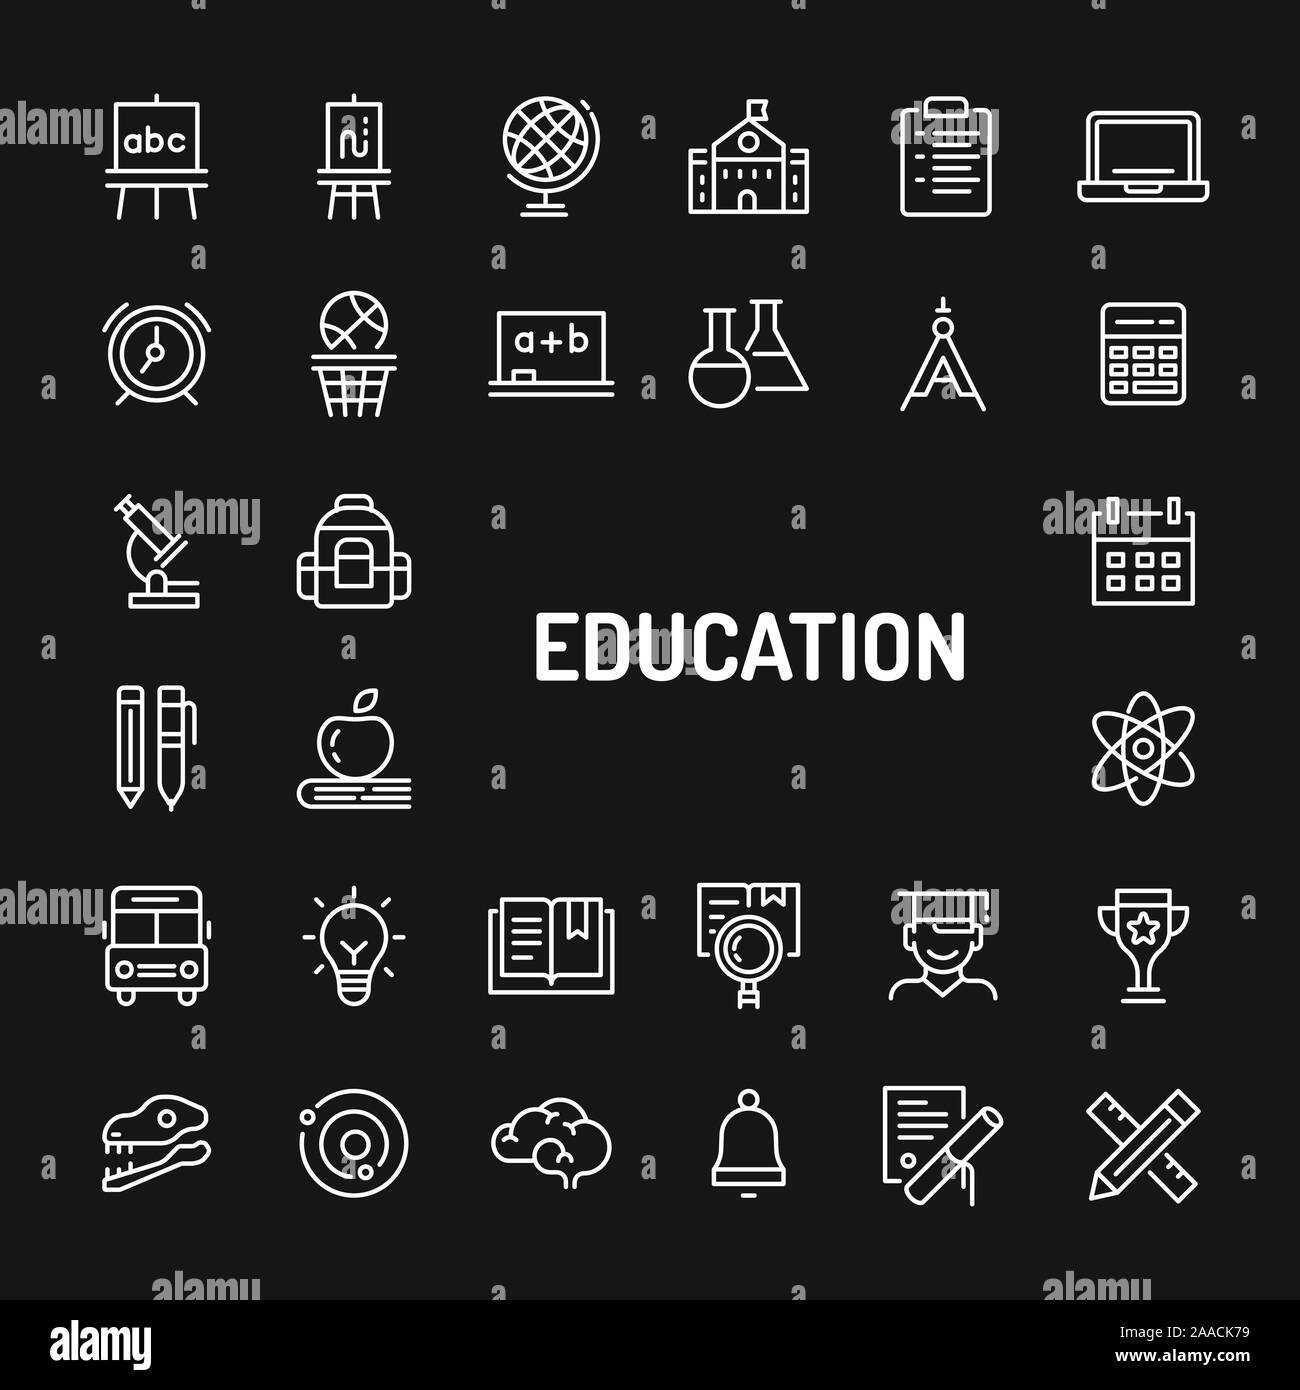 Simple white line icons isolated over black background related to stationery, education and school activities. Vector signs and symbols collections fo Stock Vector